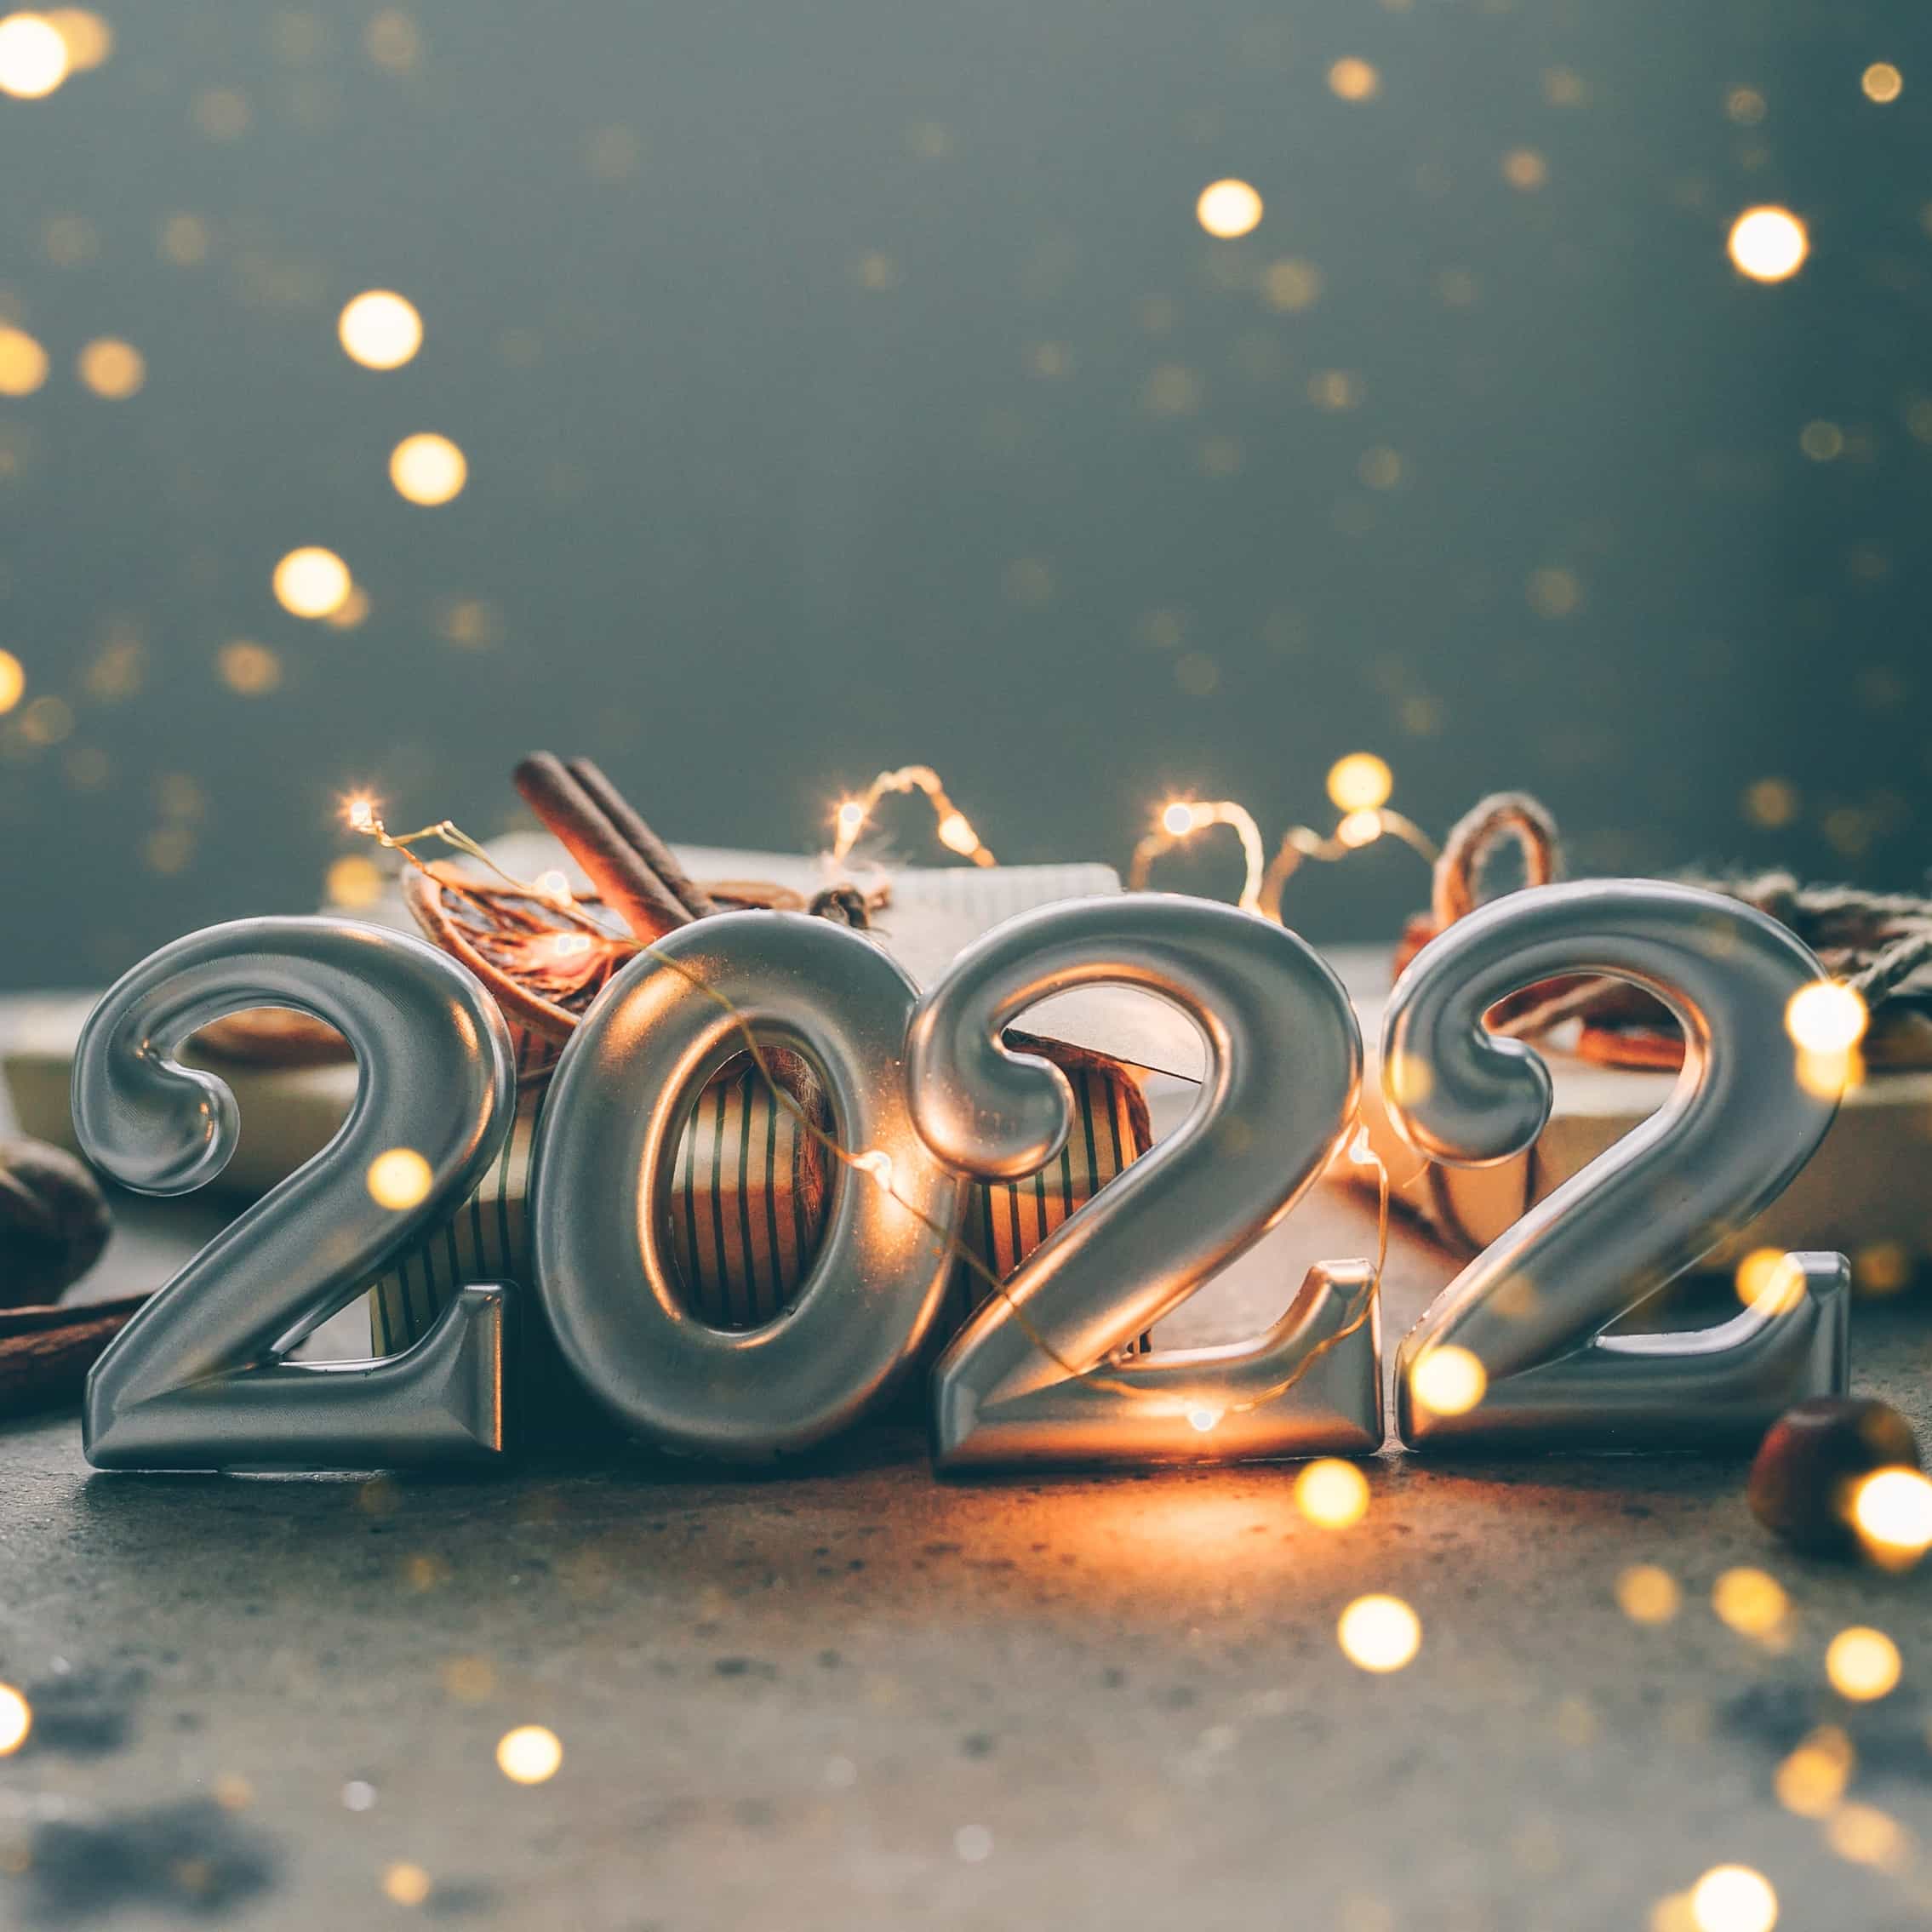 What might 2022 have in store for investors?